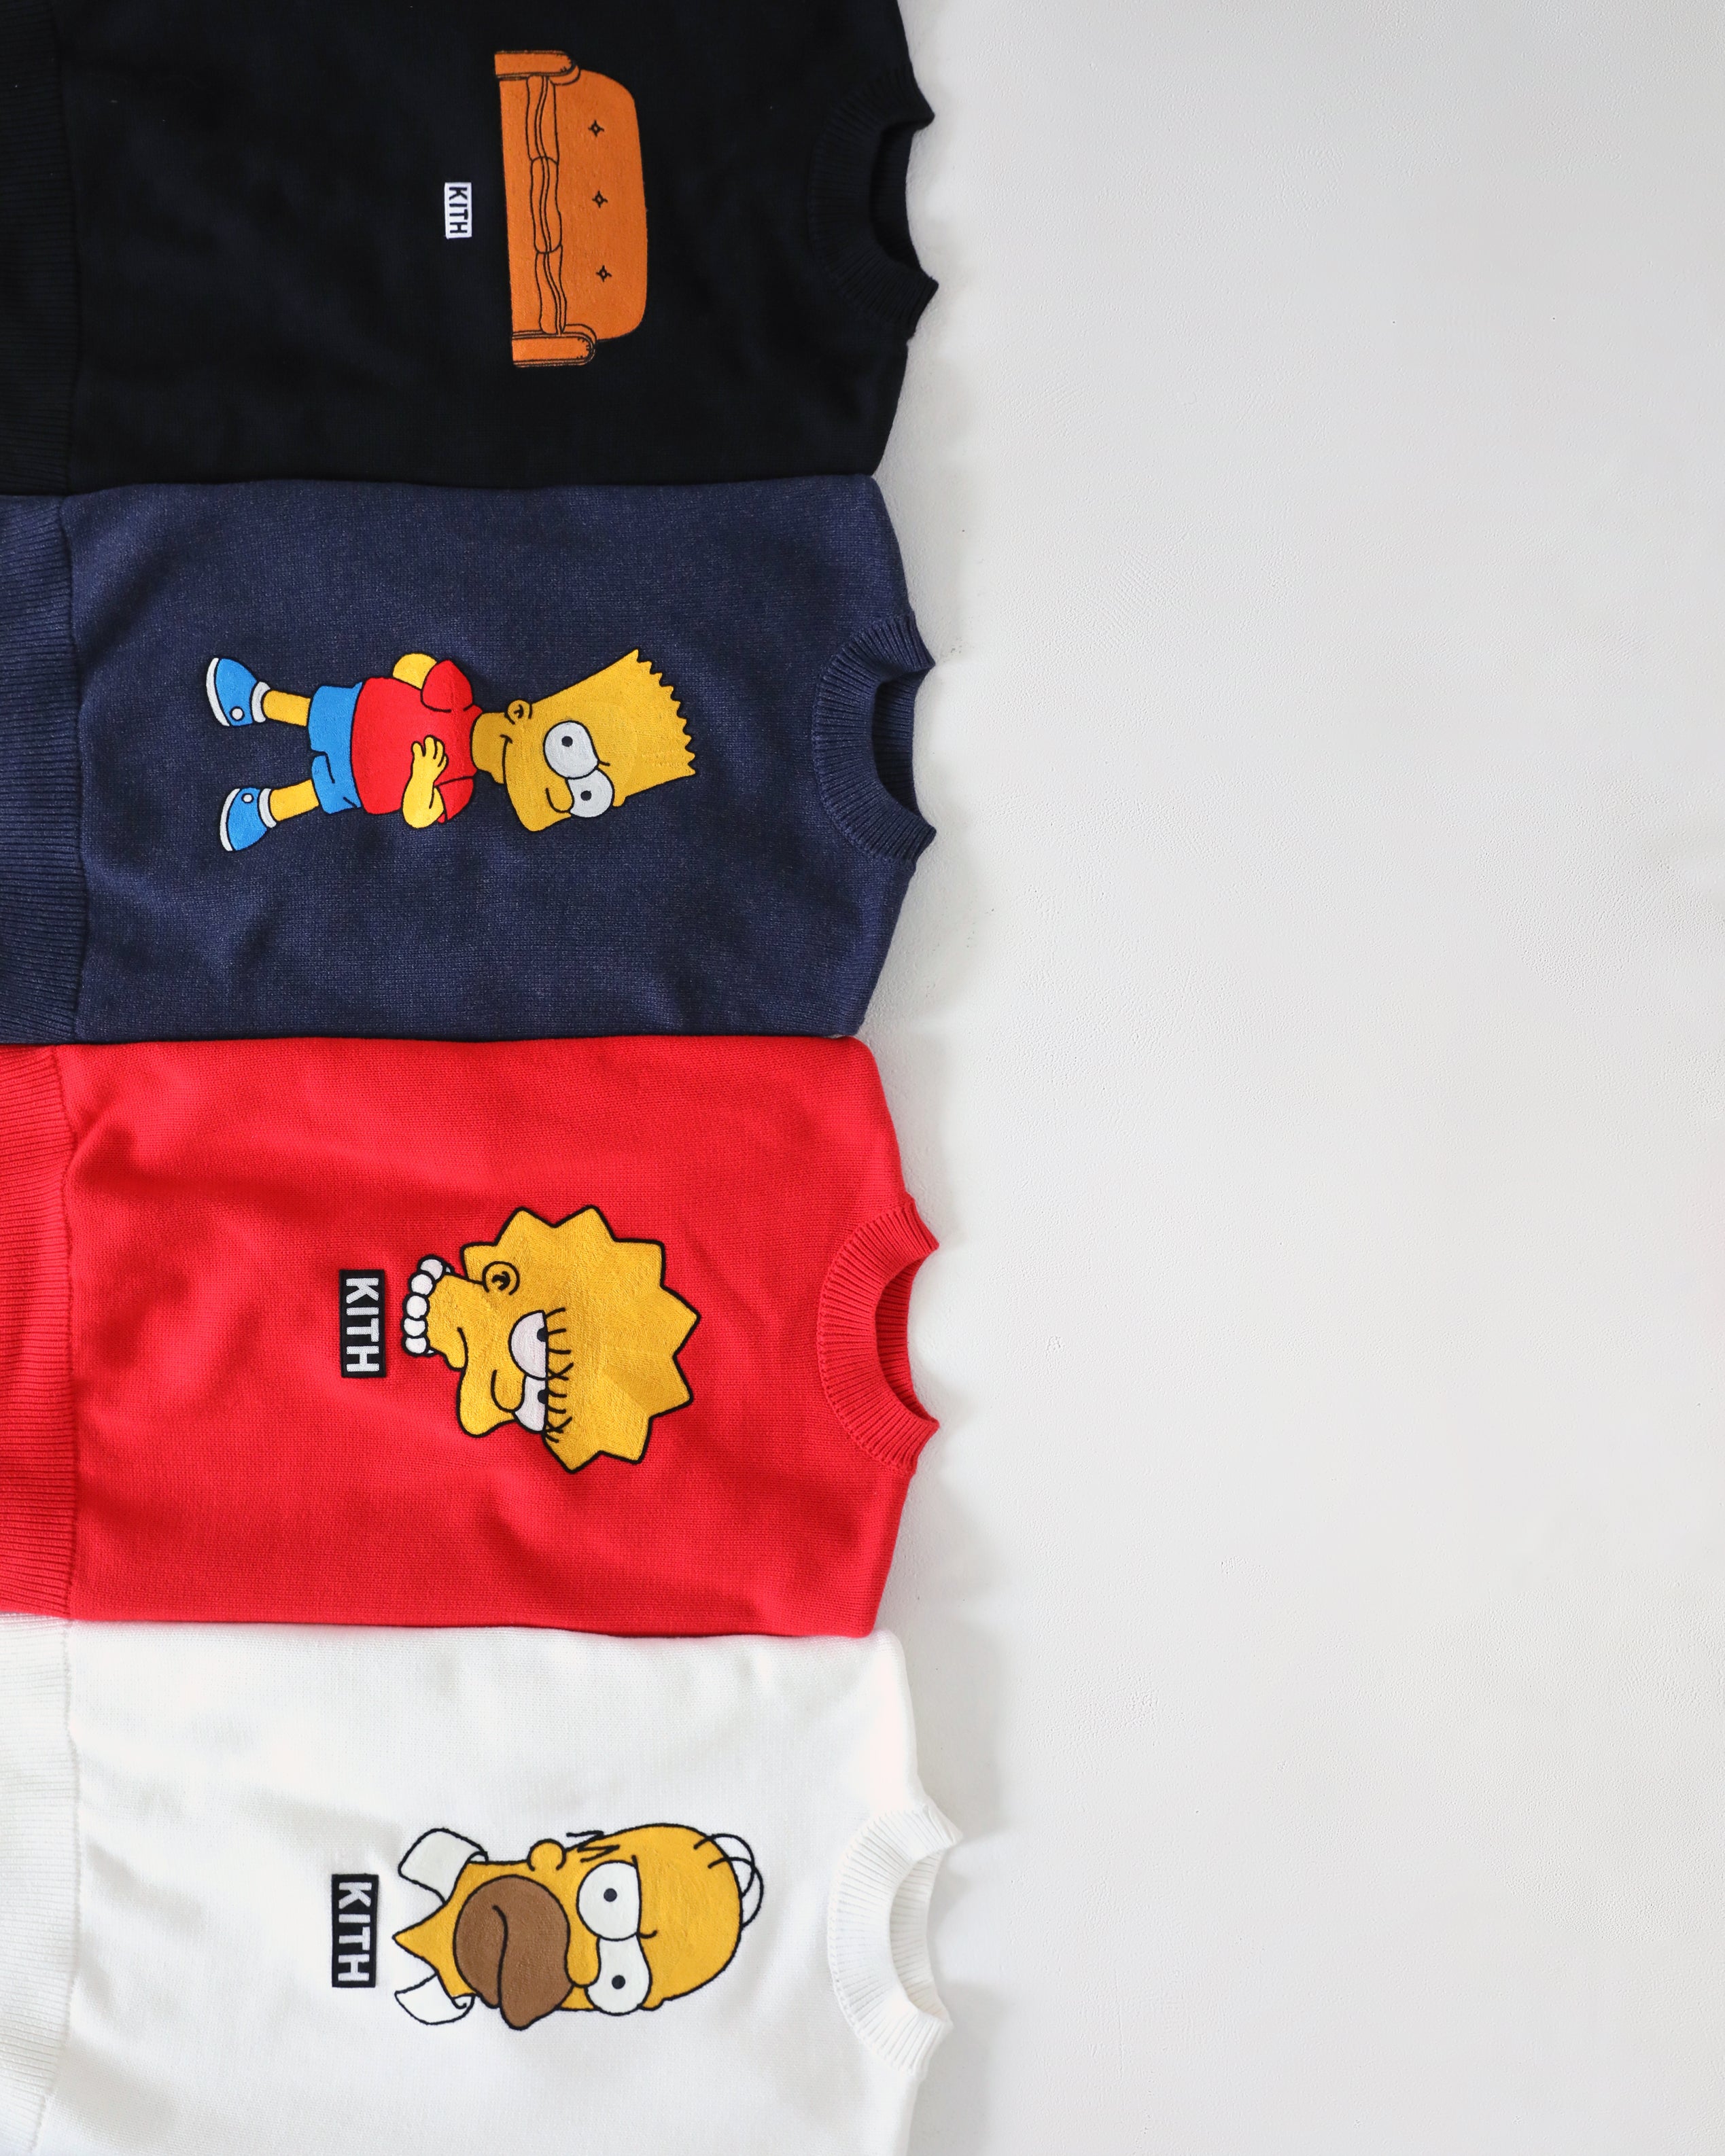 Kith for The Simpsons 2021 – Kith Tokyo